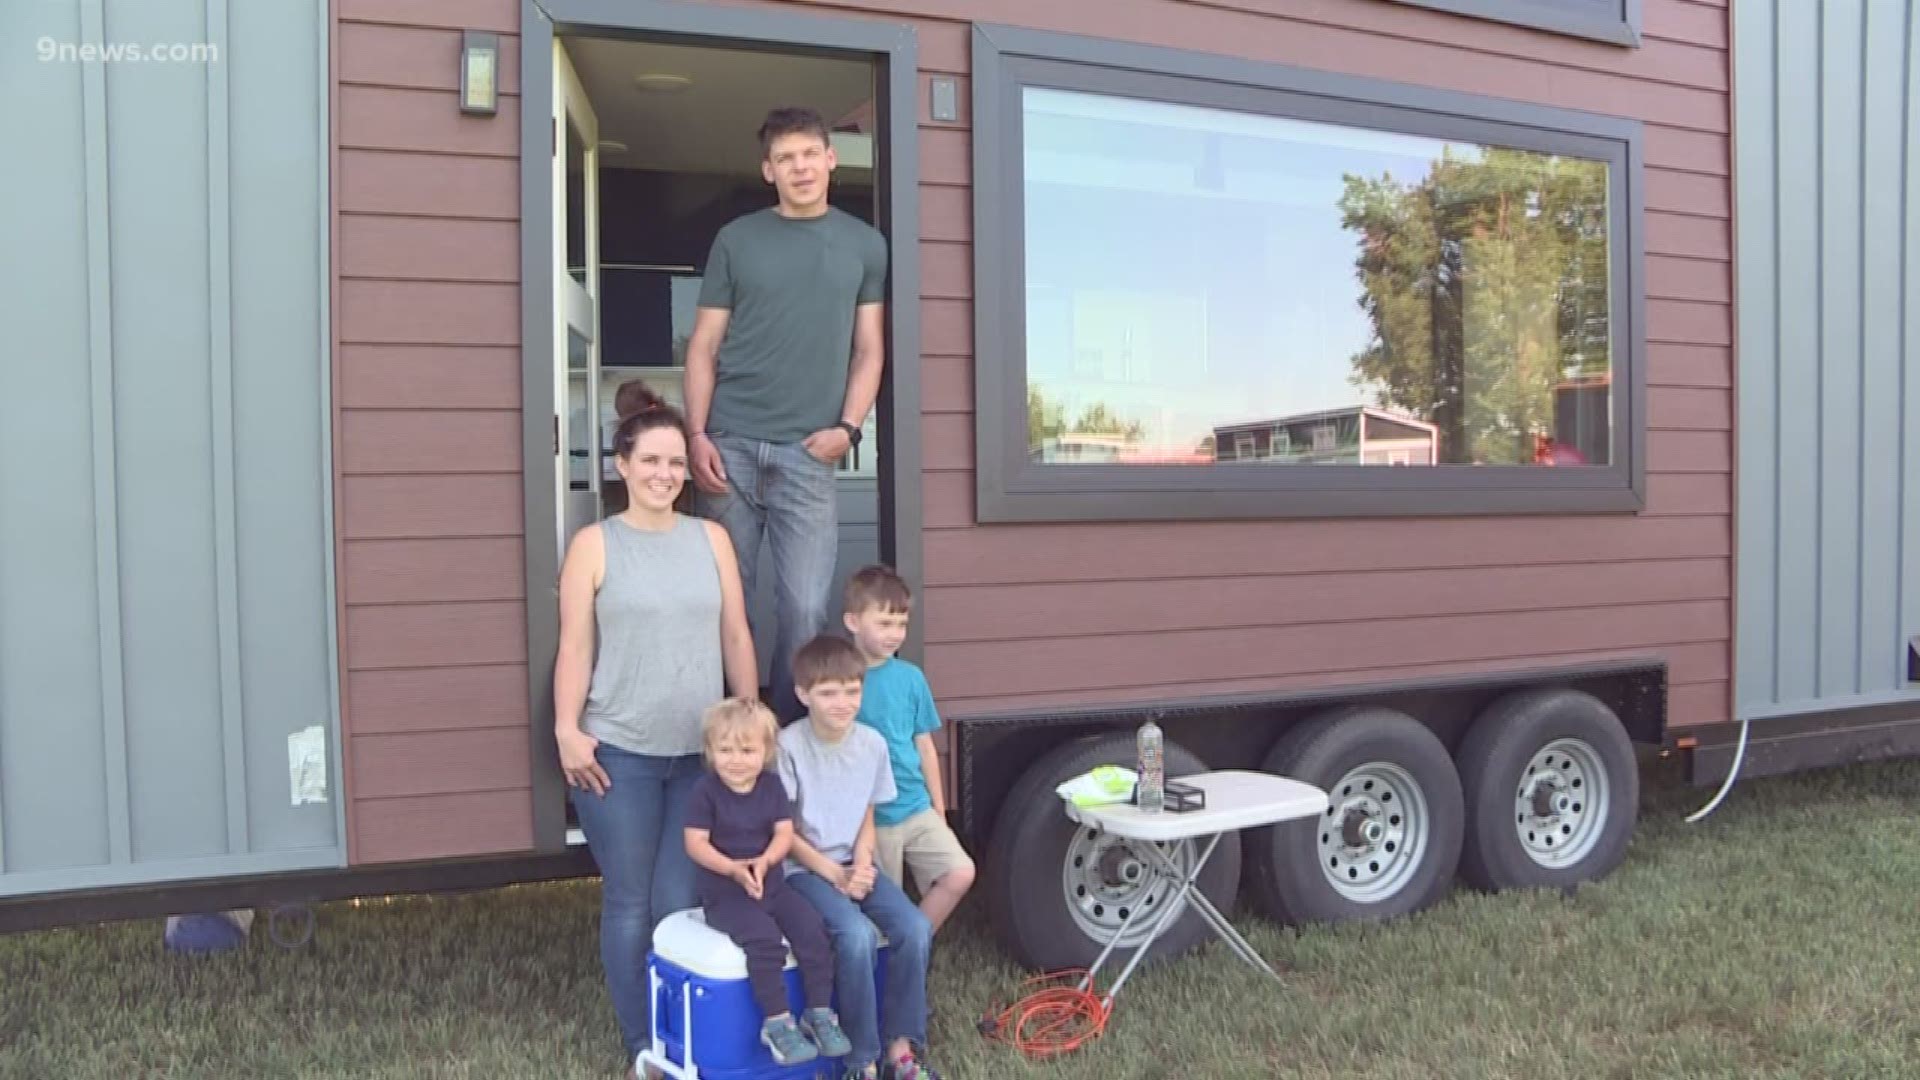 Tiny home residents explain why the minimalist lifestyle is appealing (and why others might find it is, too).